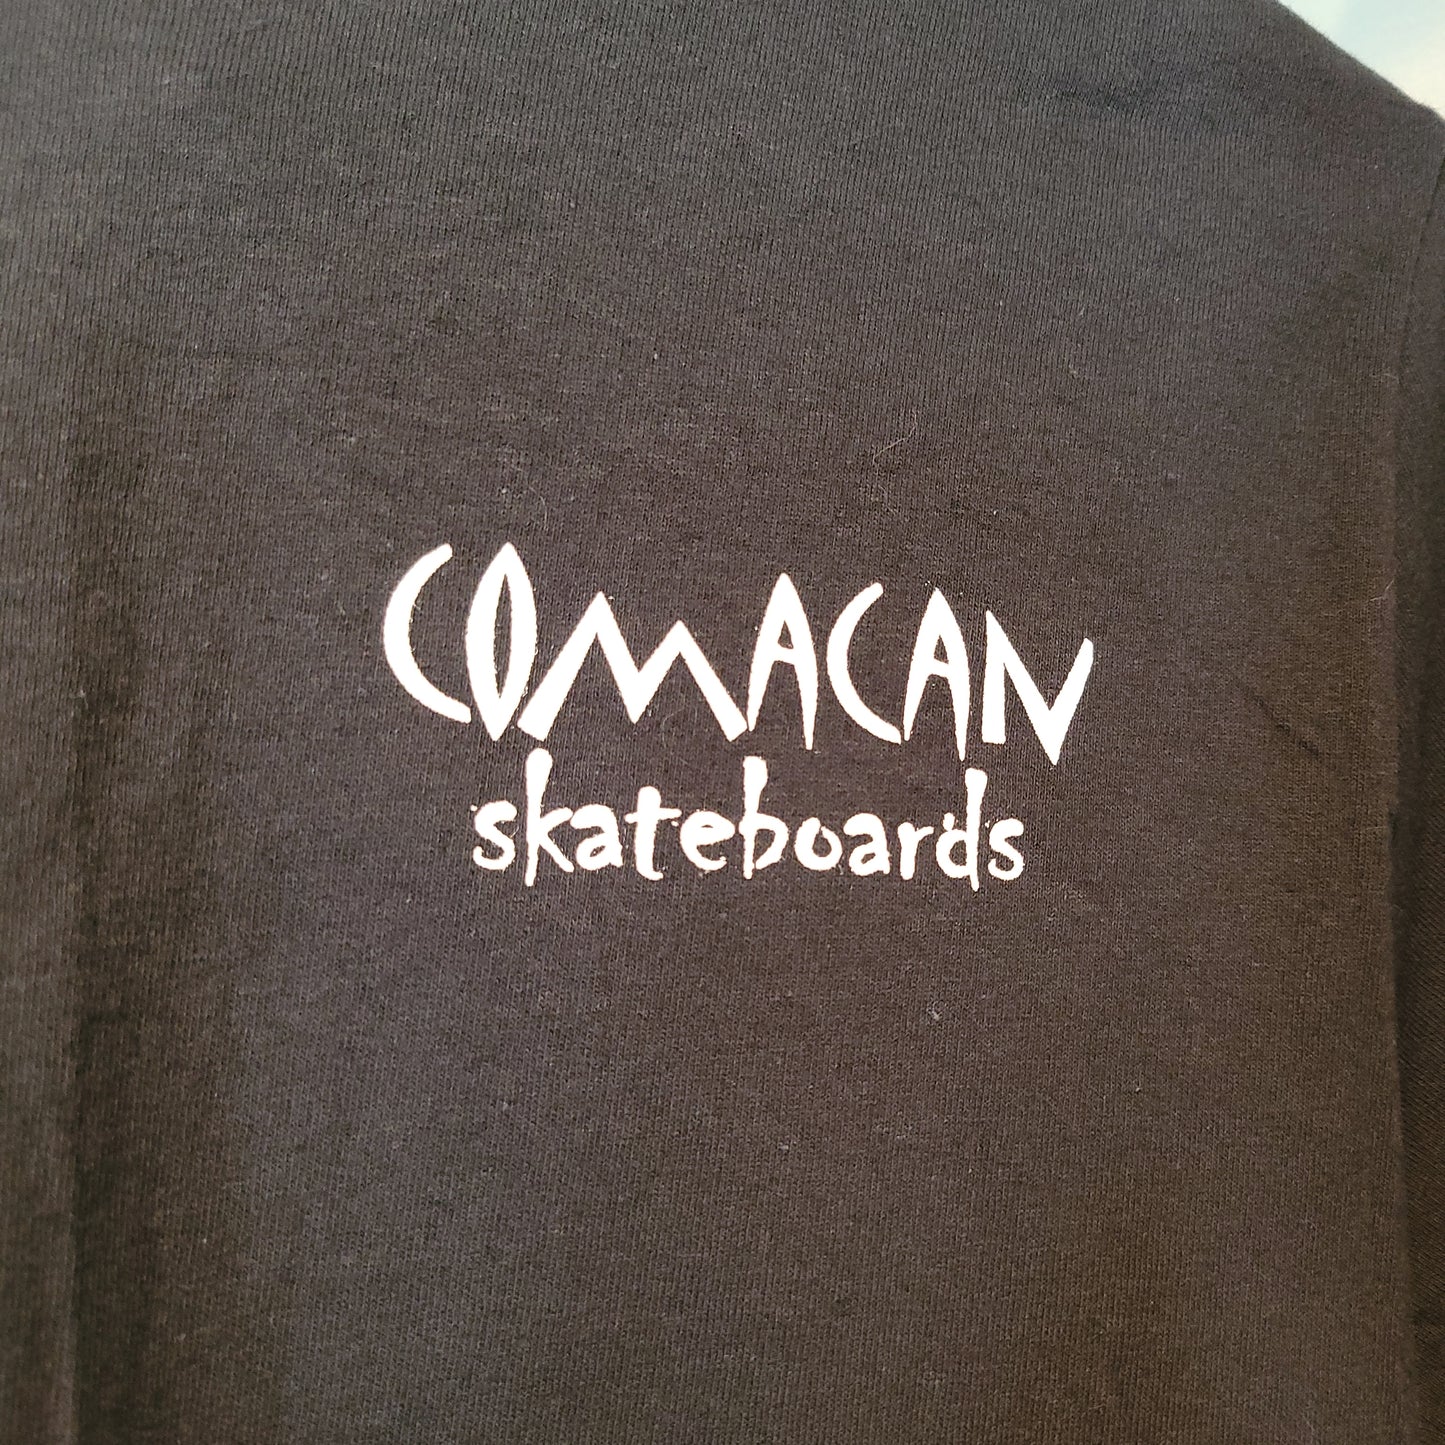 COMACAN T-Shirts